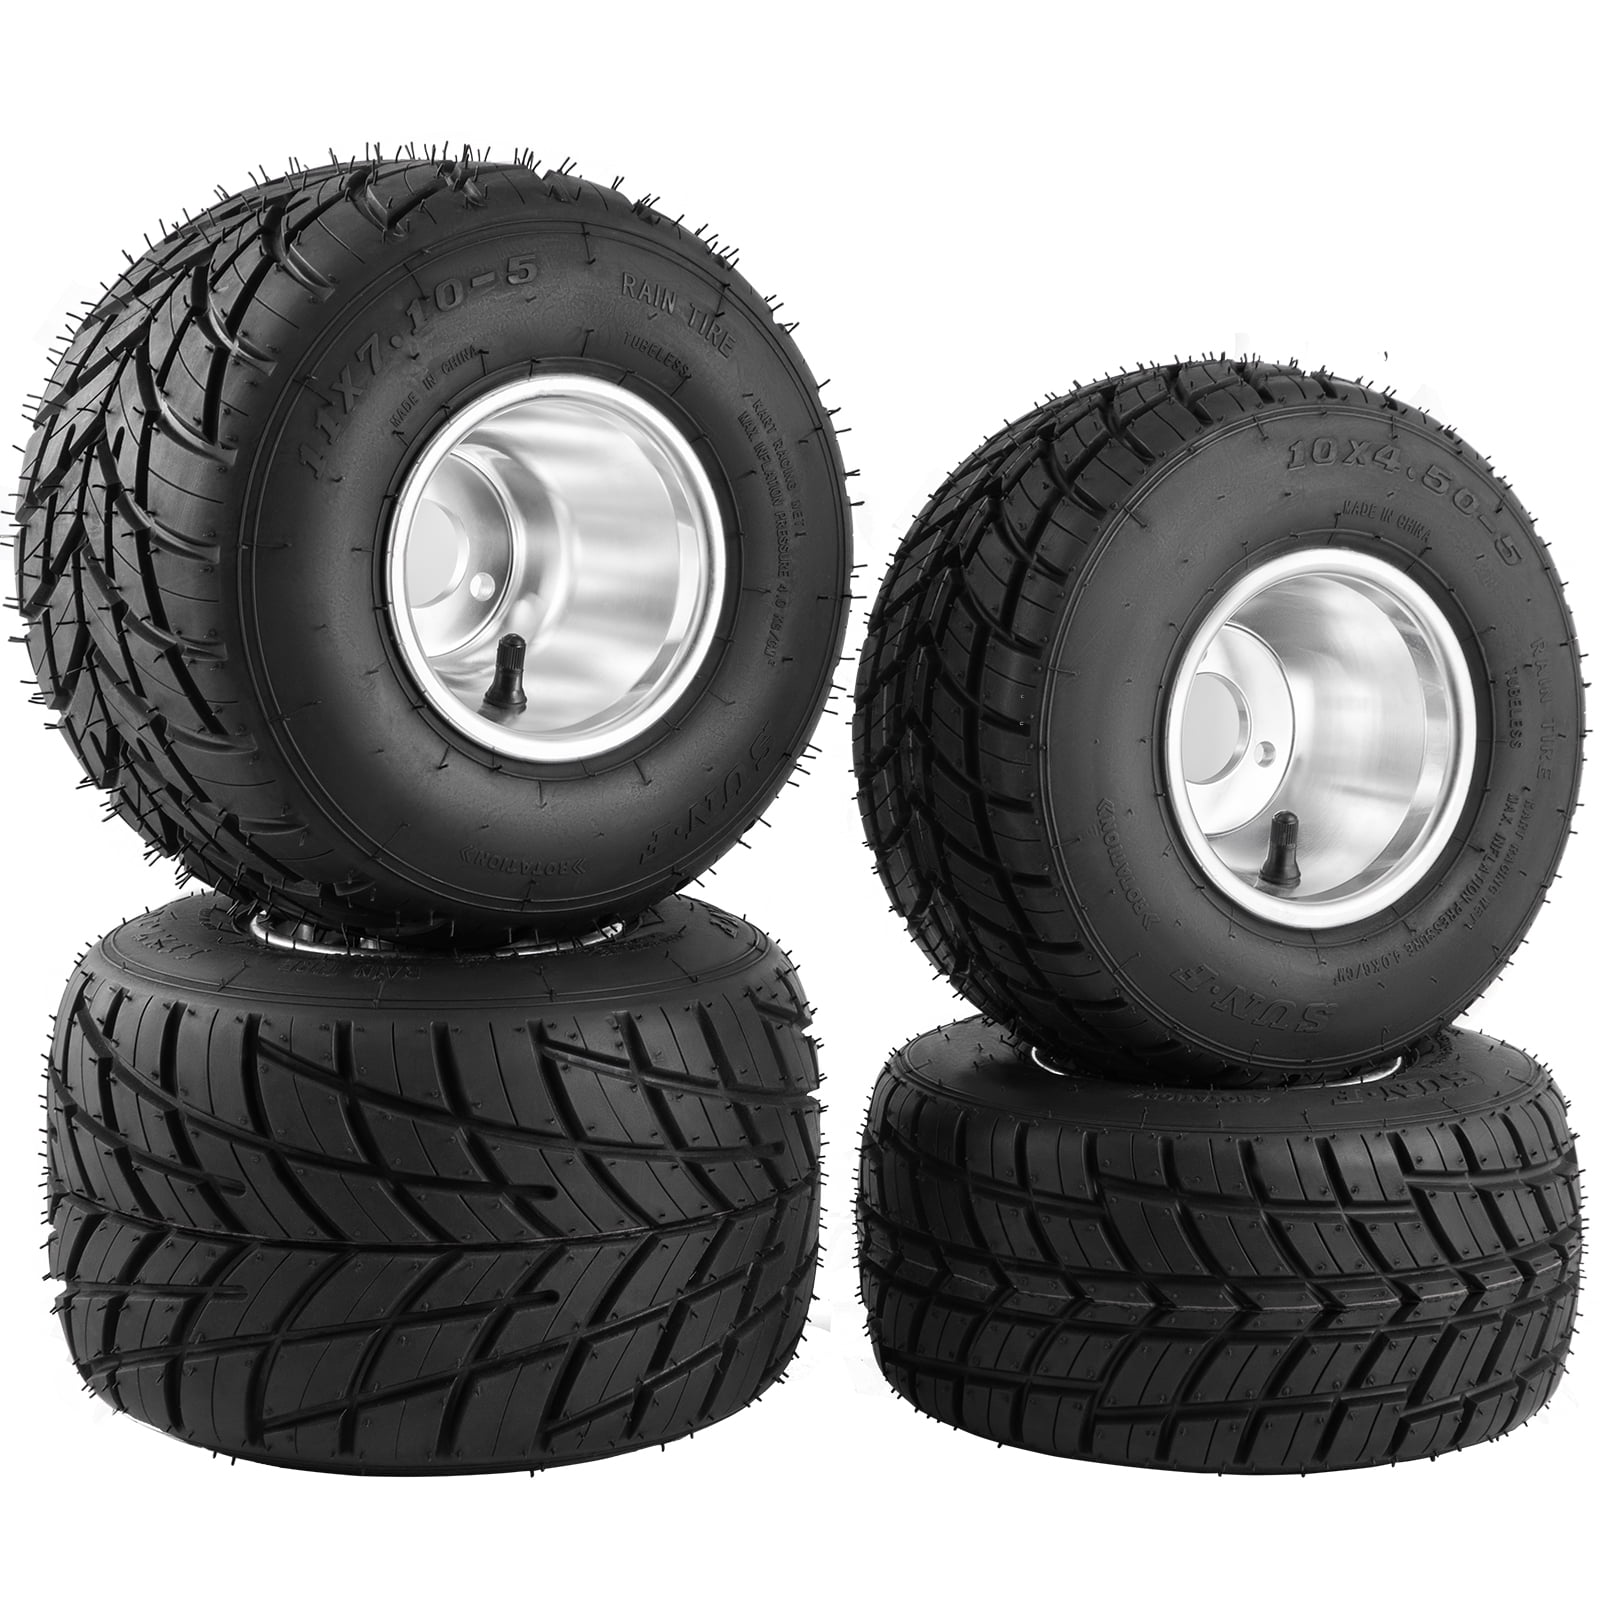 VEVOR Tires and Rims Go Kart 58 mm Bolt Pattern, Go Cart Wheels and Tires  10x 4.50 Front, 11x 6.0 Rear HUB- 3-hole Sets of 4